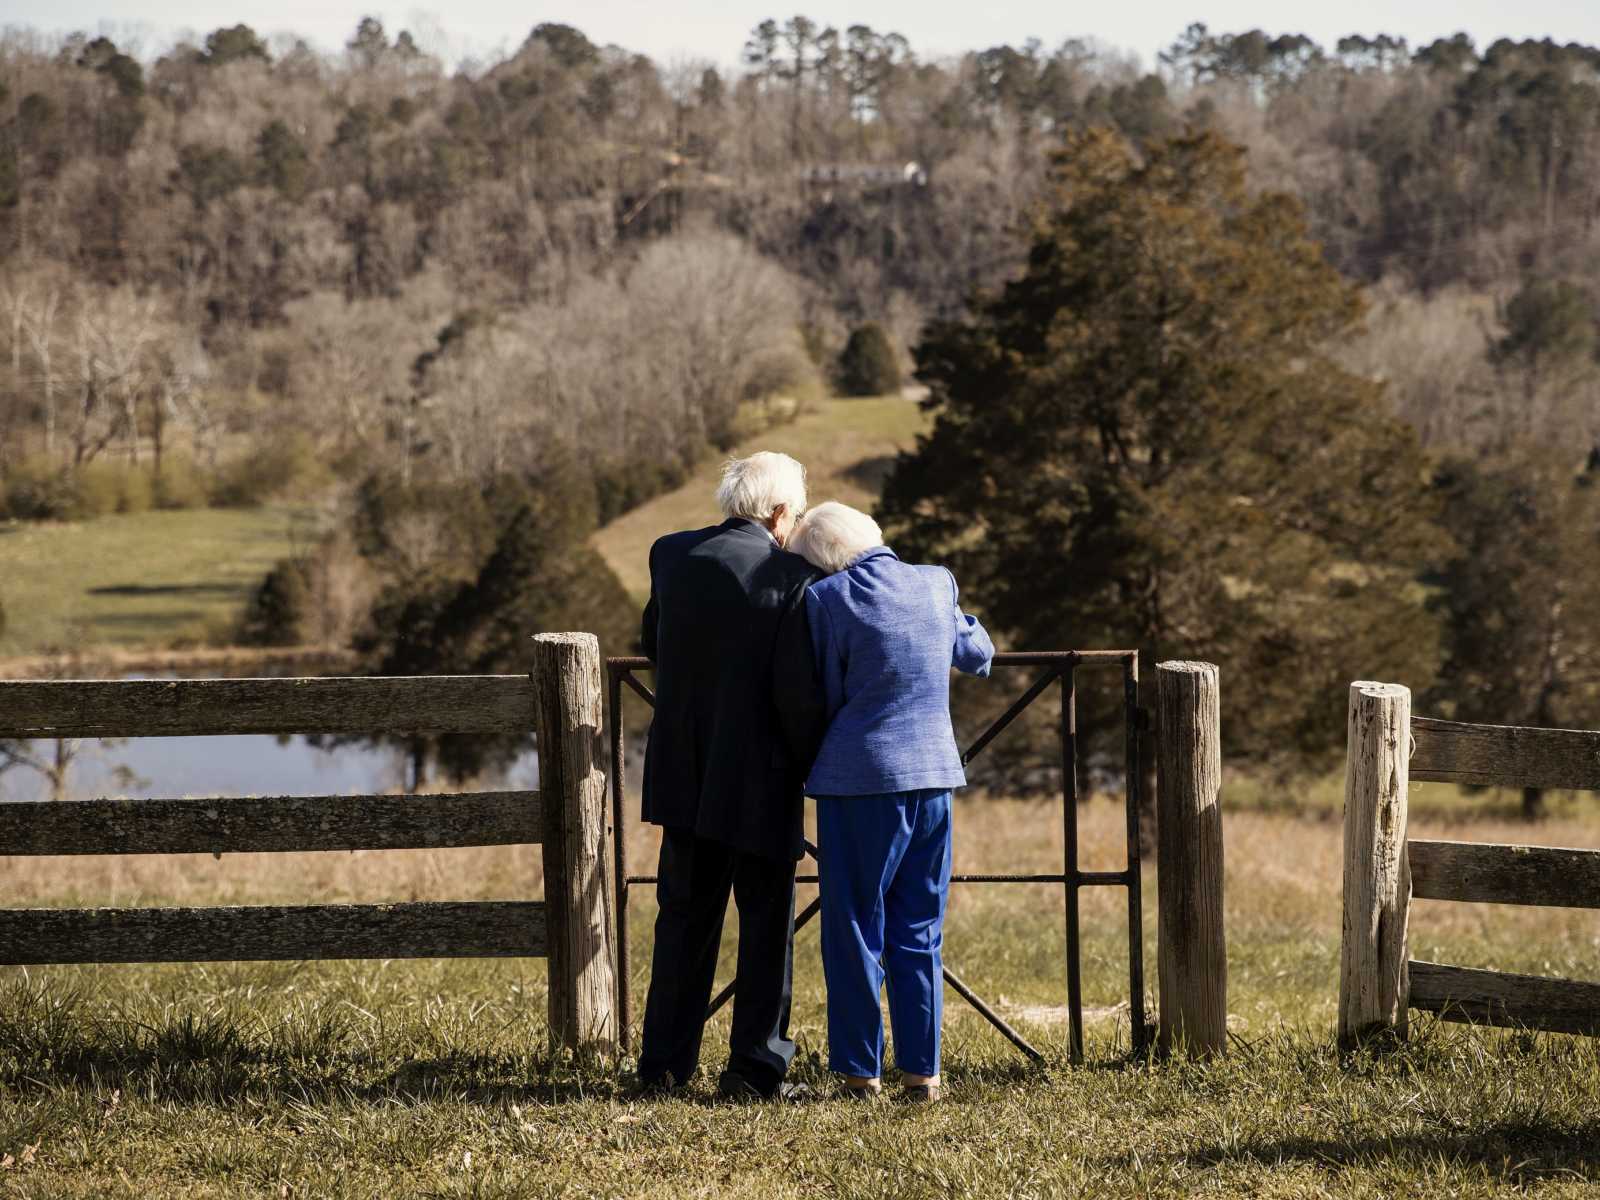 92-year-old woman leans her head on her husband's shoulders as they stand against iron gate looking out at grass field